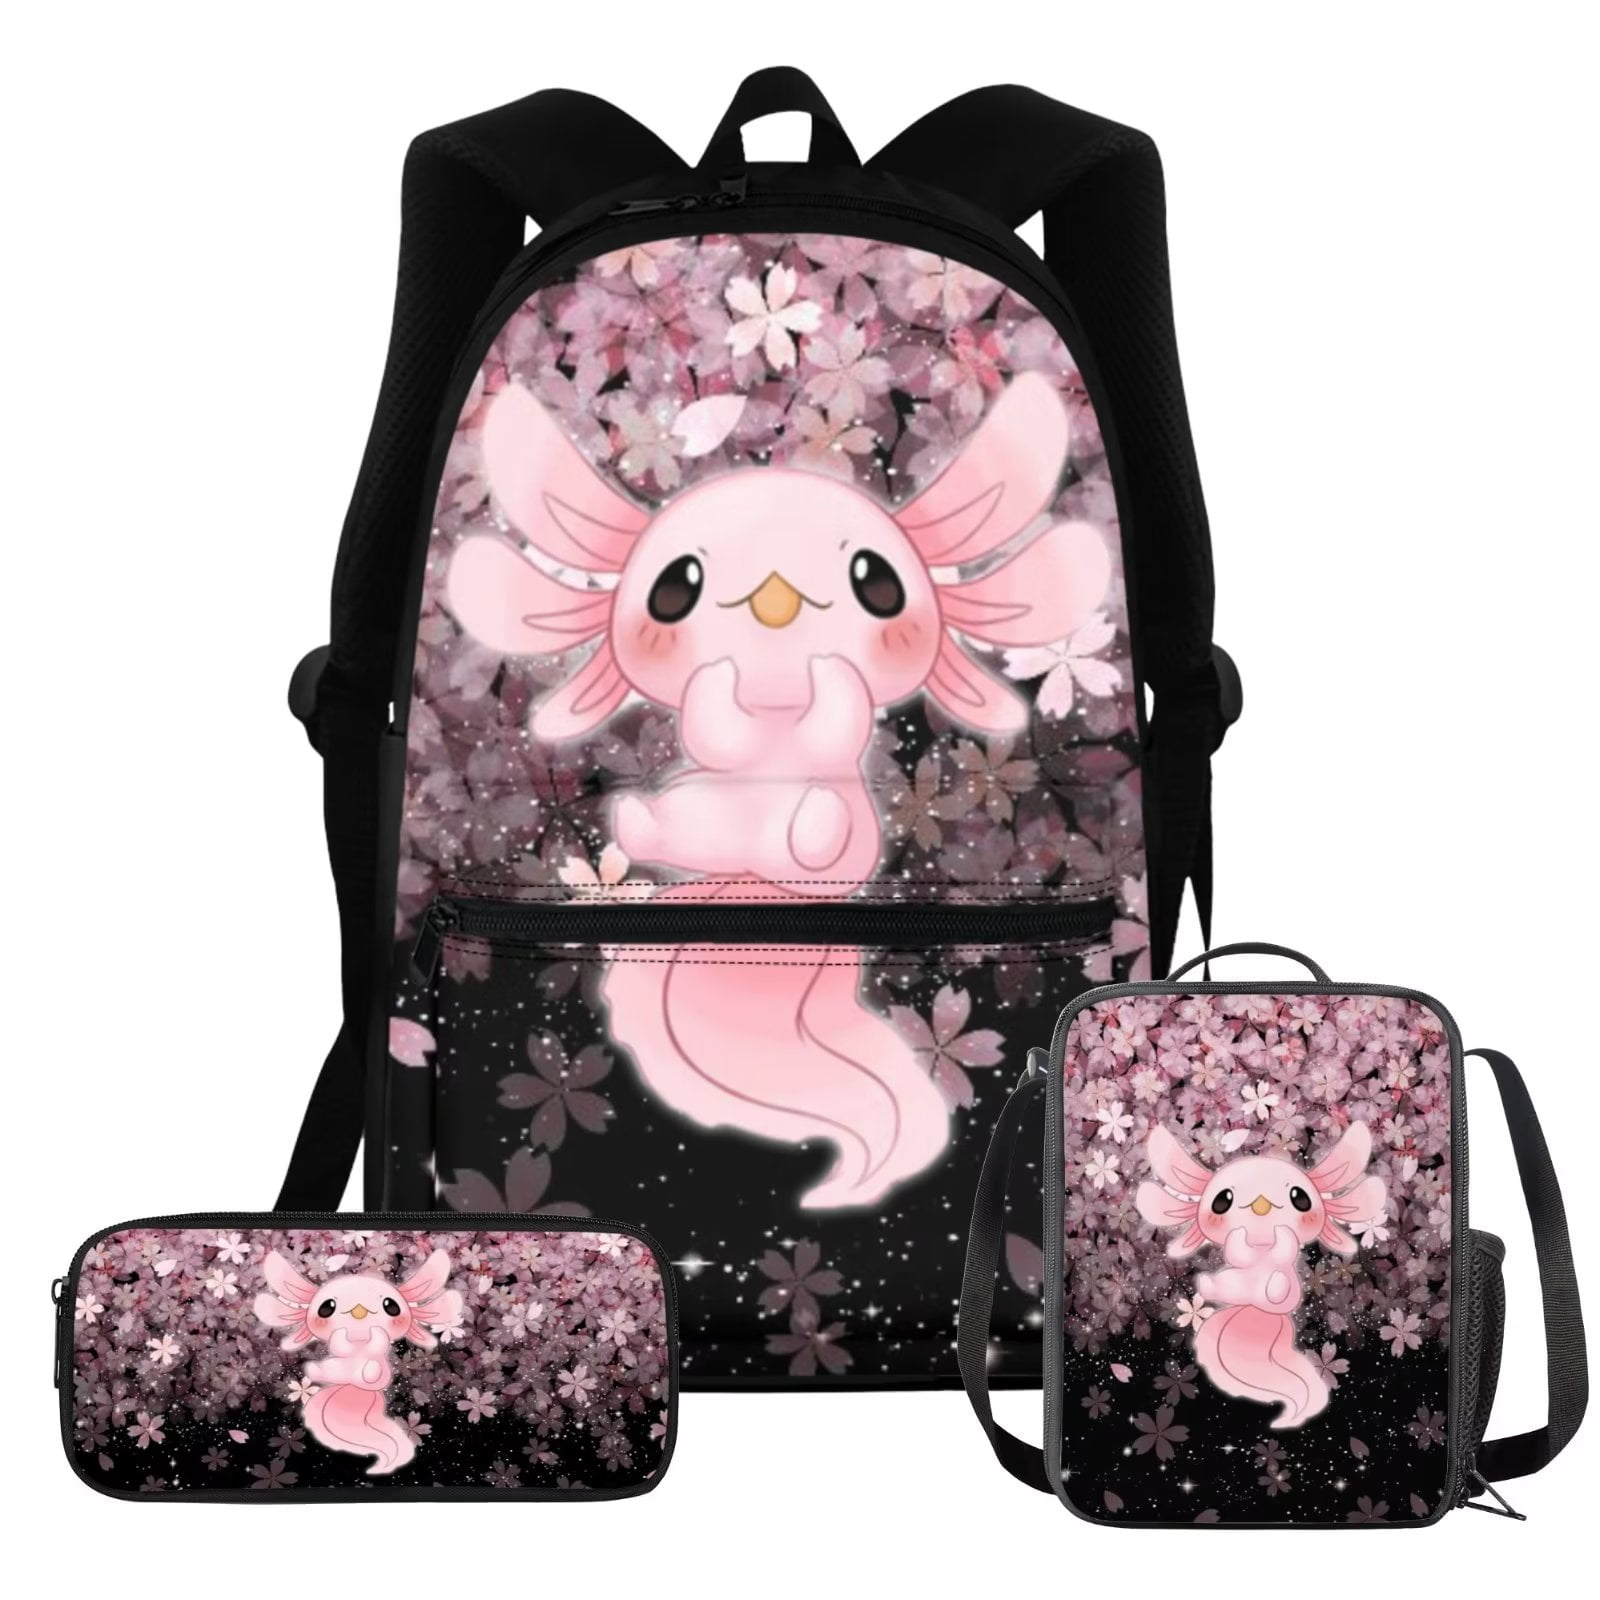 3pcs Poppy Playtime Backpack & Lunch Box Child Students School Bag  Rucksack, Lunch Bag, Pencil Case, Gamer Merchandise Only Pencil Case 4d5a, Only Pencil Case